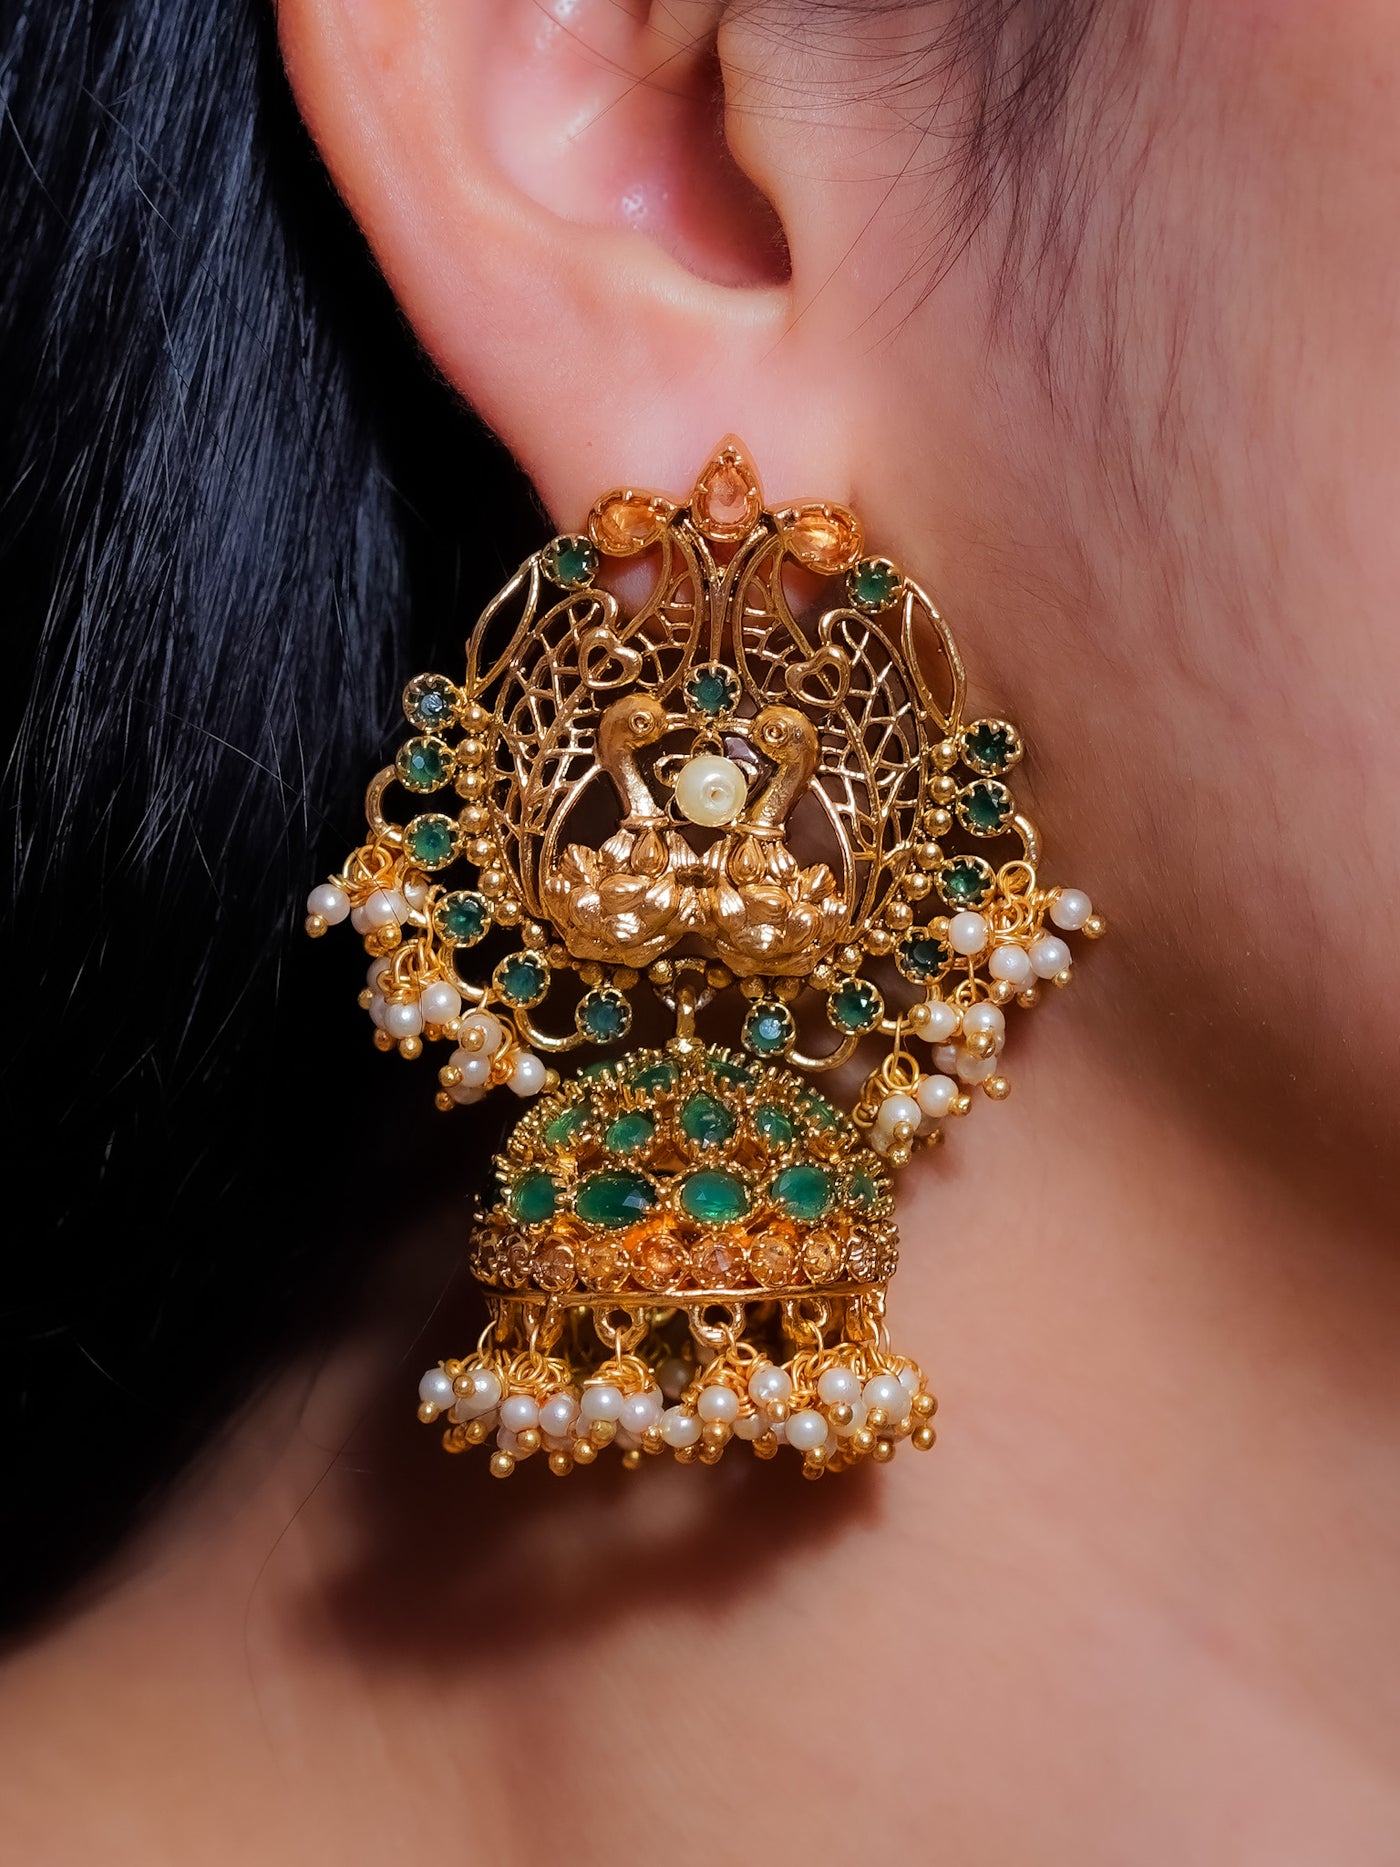 Heavy peacock earrings with jhumkas and cluster pearl danglers in temple Jewellery